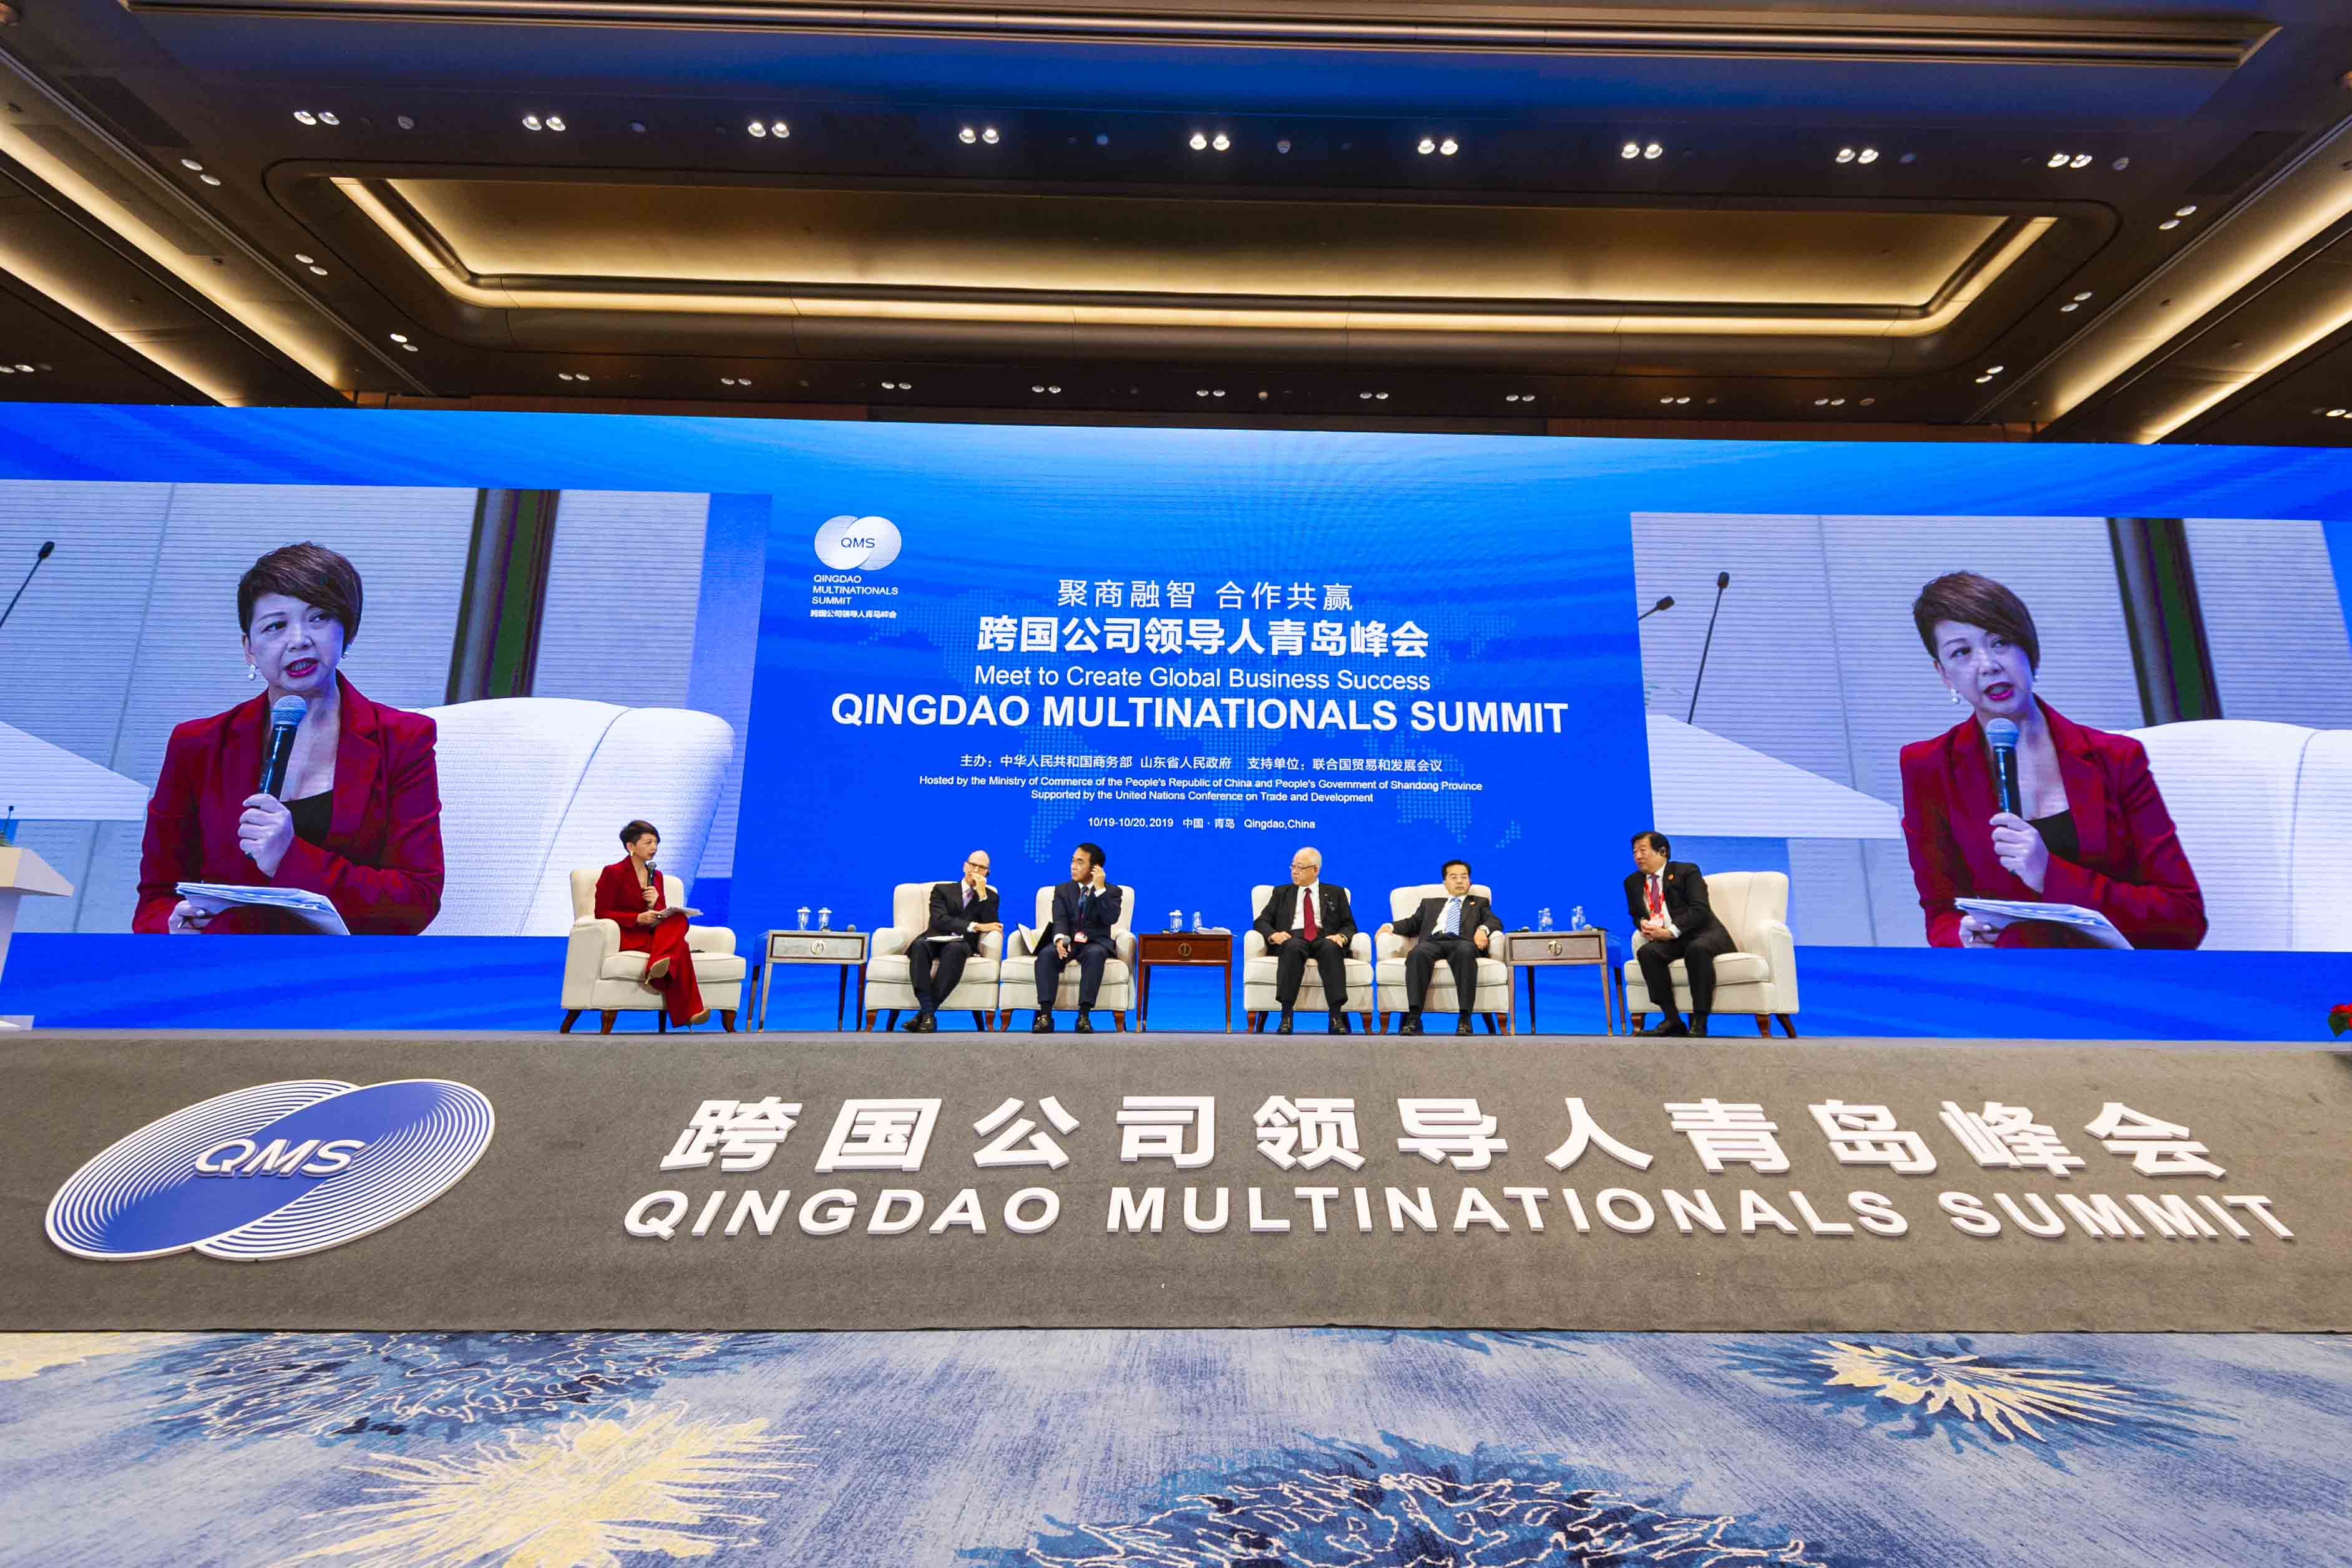 The Opening Forum of the First Qingdao Multinationals Summit